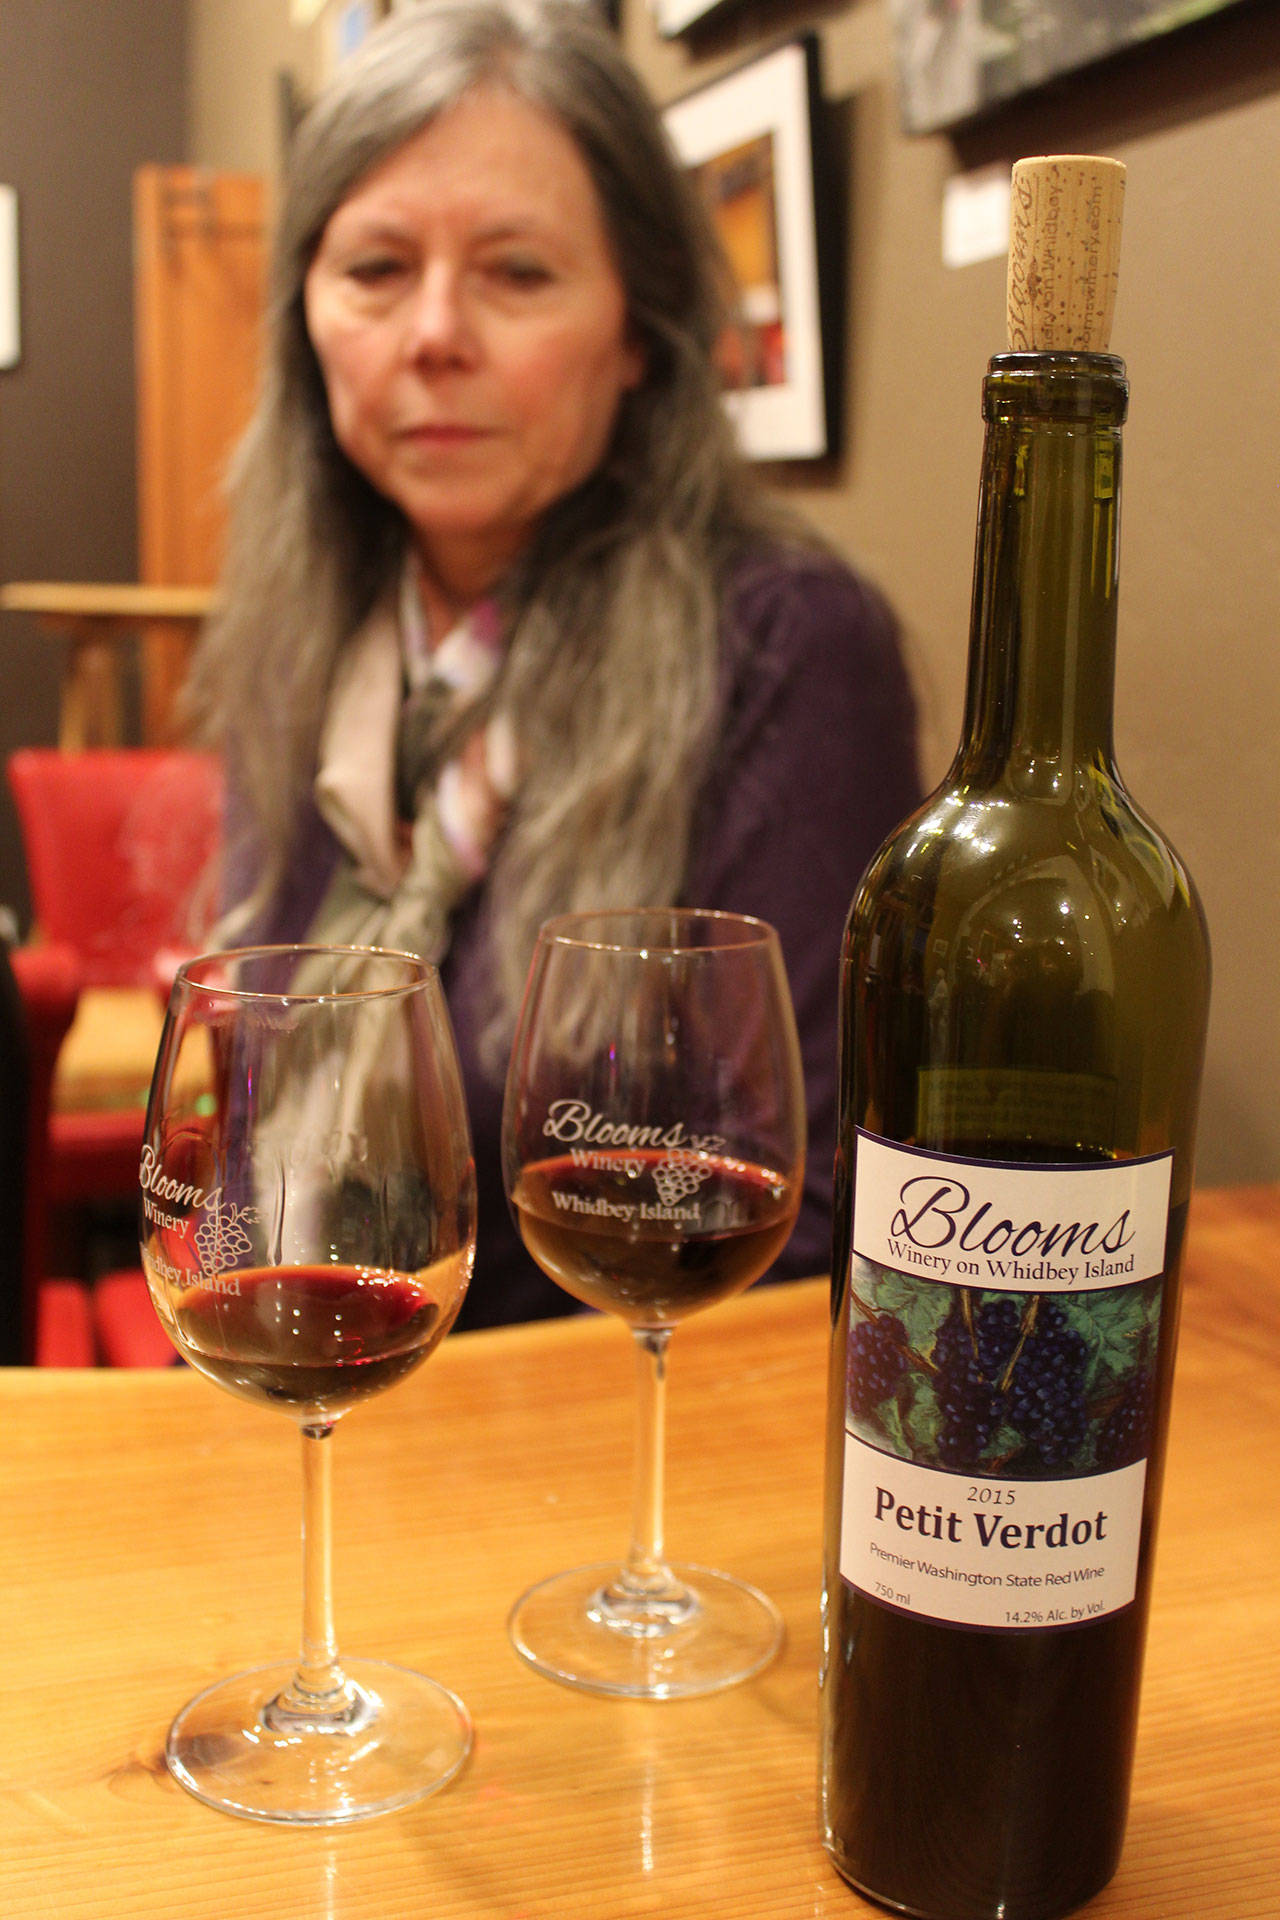 Blooms Winery plans to release a new Petit Verdot during this year’s vintner tour that runs over two February weekends. Virgina Bloom poured a sample for a recent tasting.